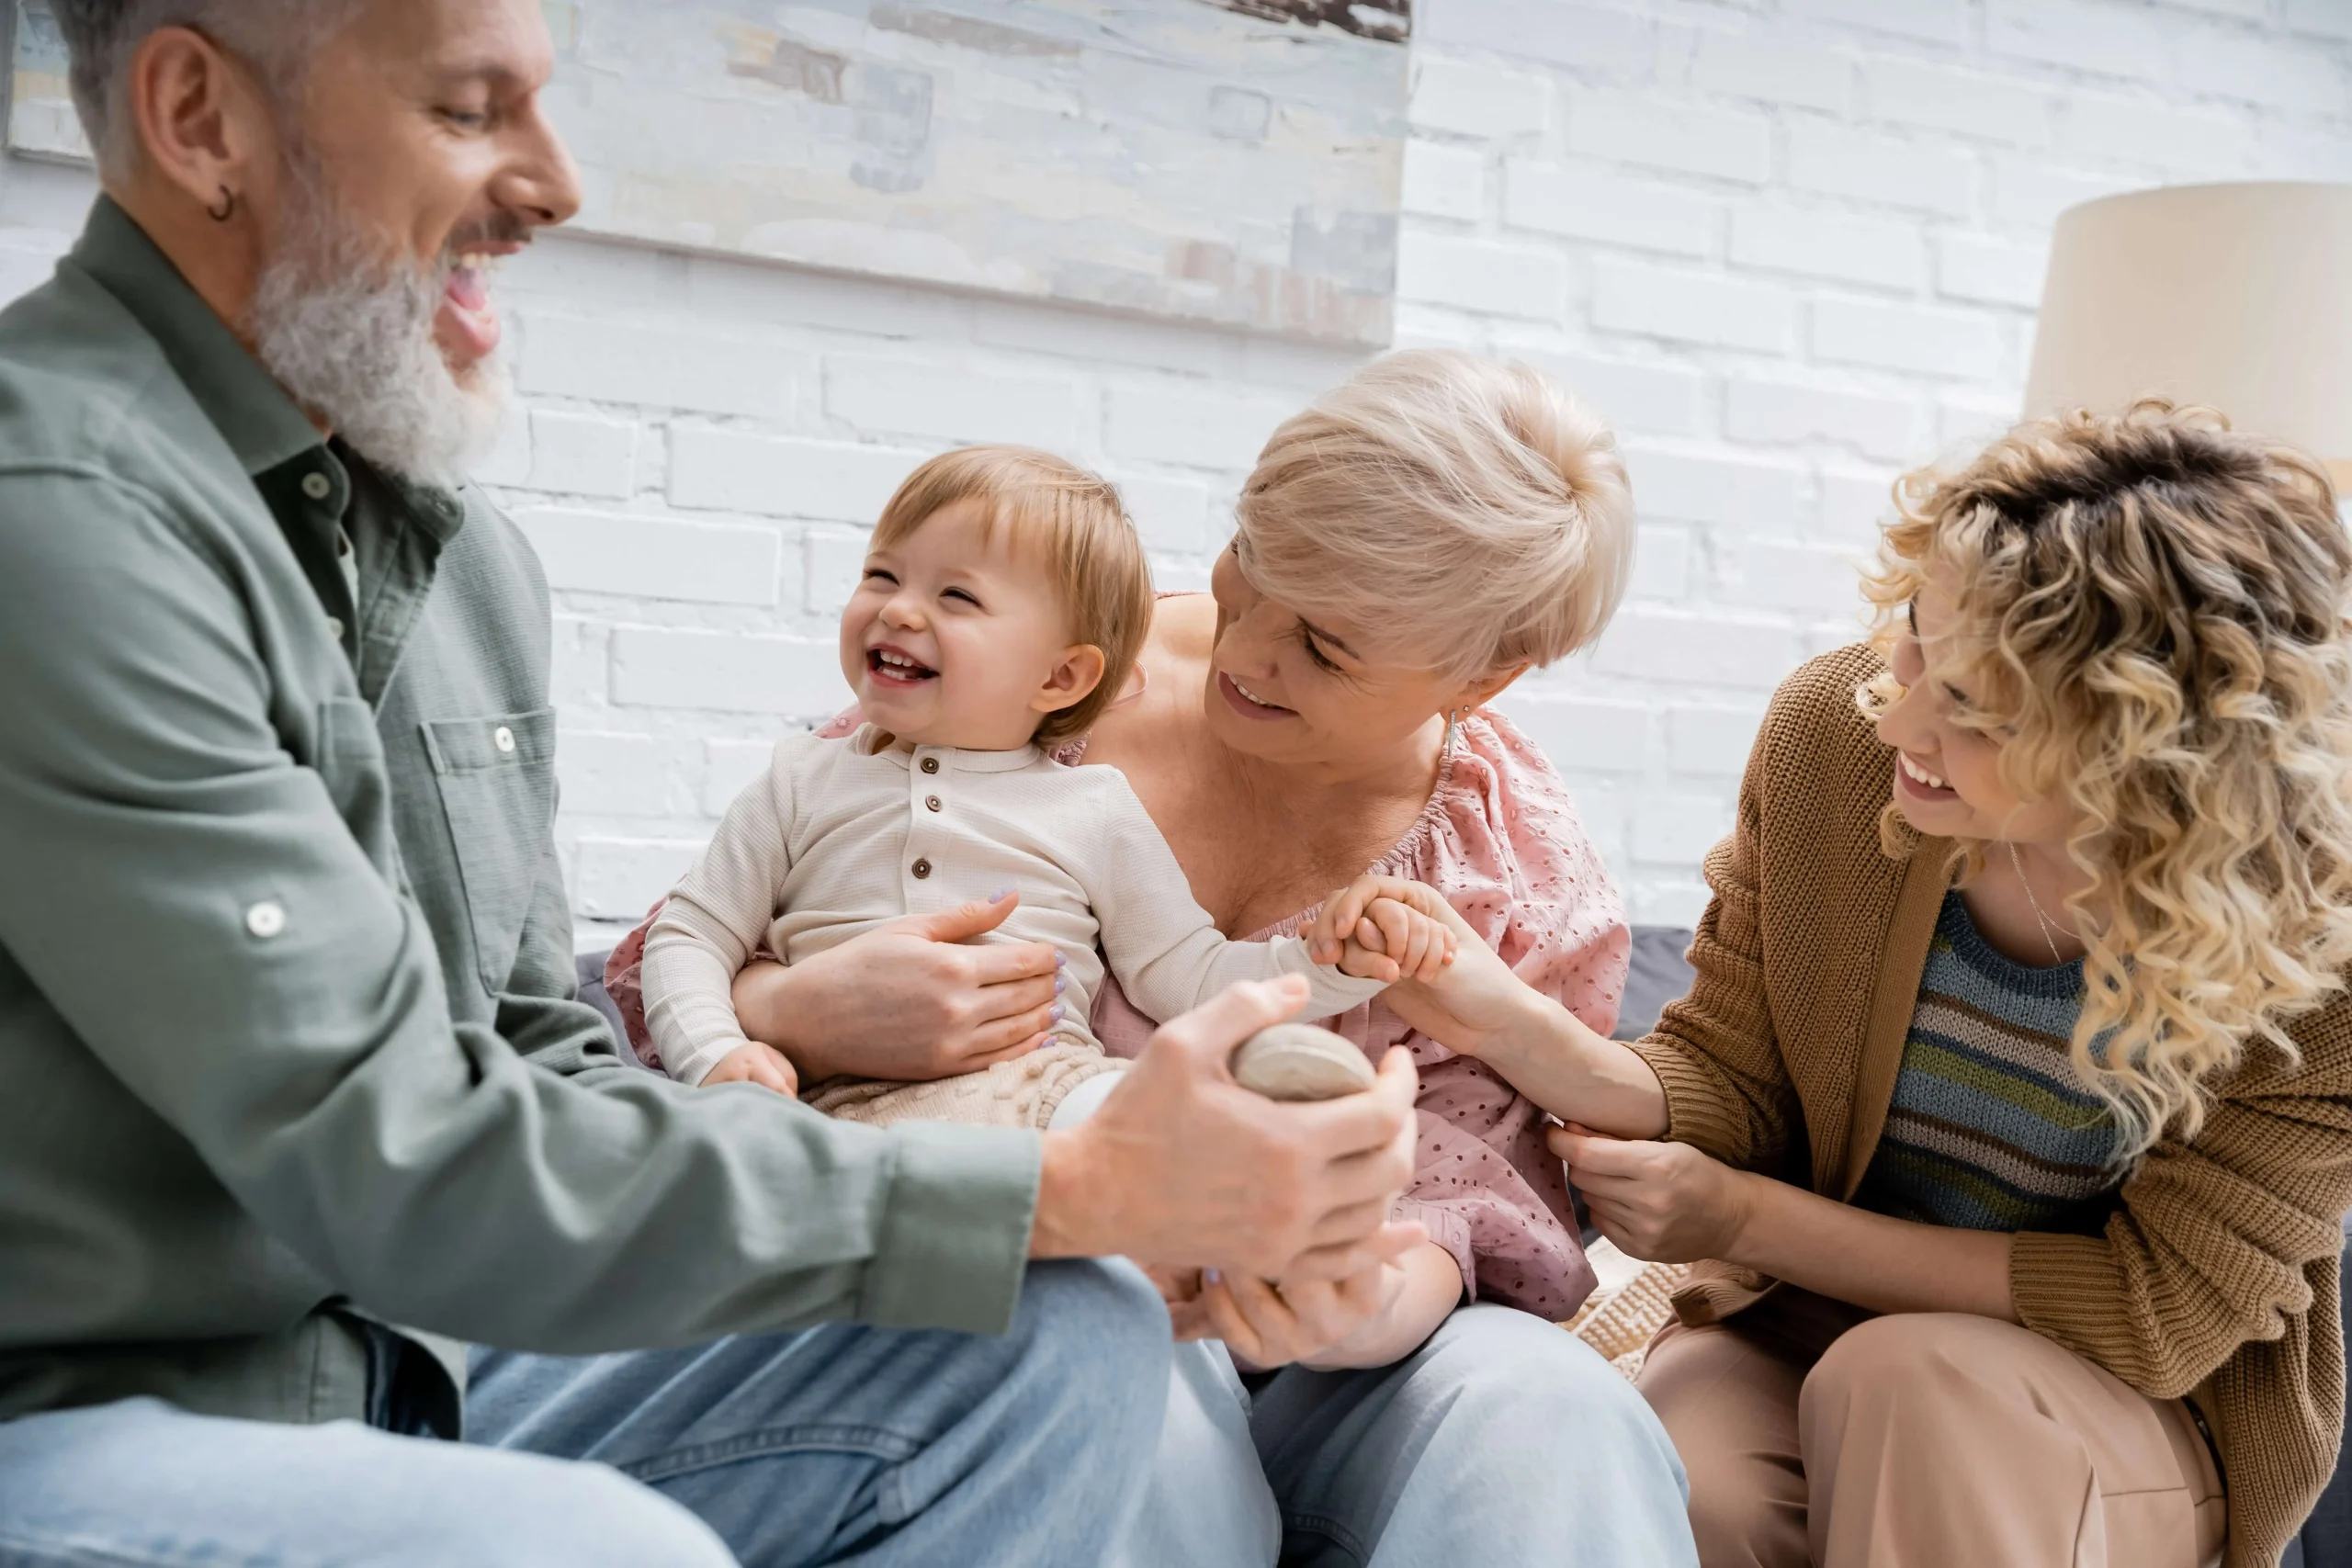 A multi-generational family, including grandparents, parents, and a child, sharing a joyful moment together, representing the peace of mind provided by customized estate plans and do-it-yourself wills.